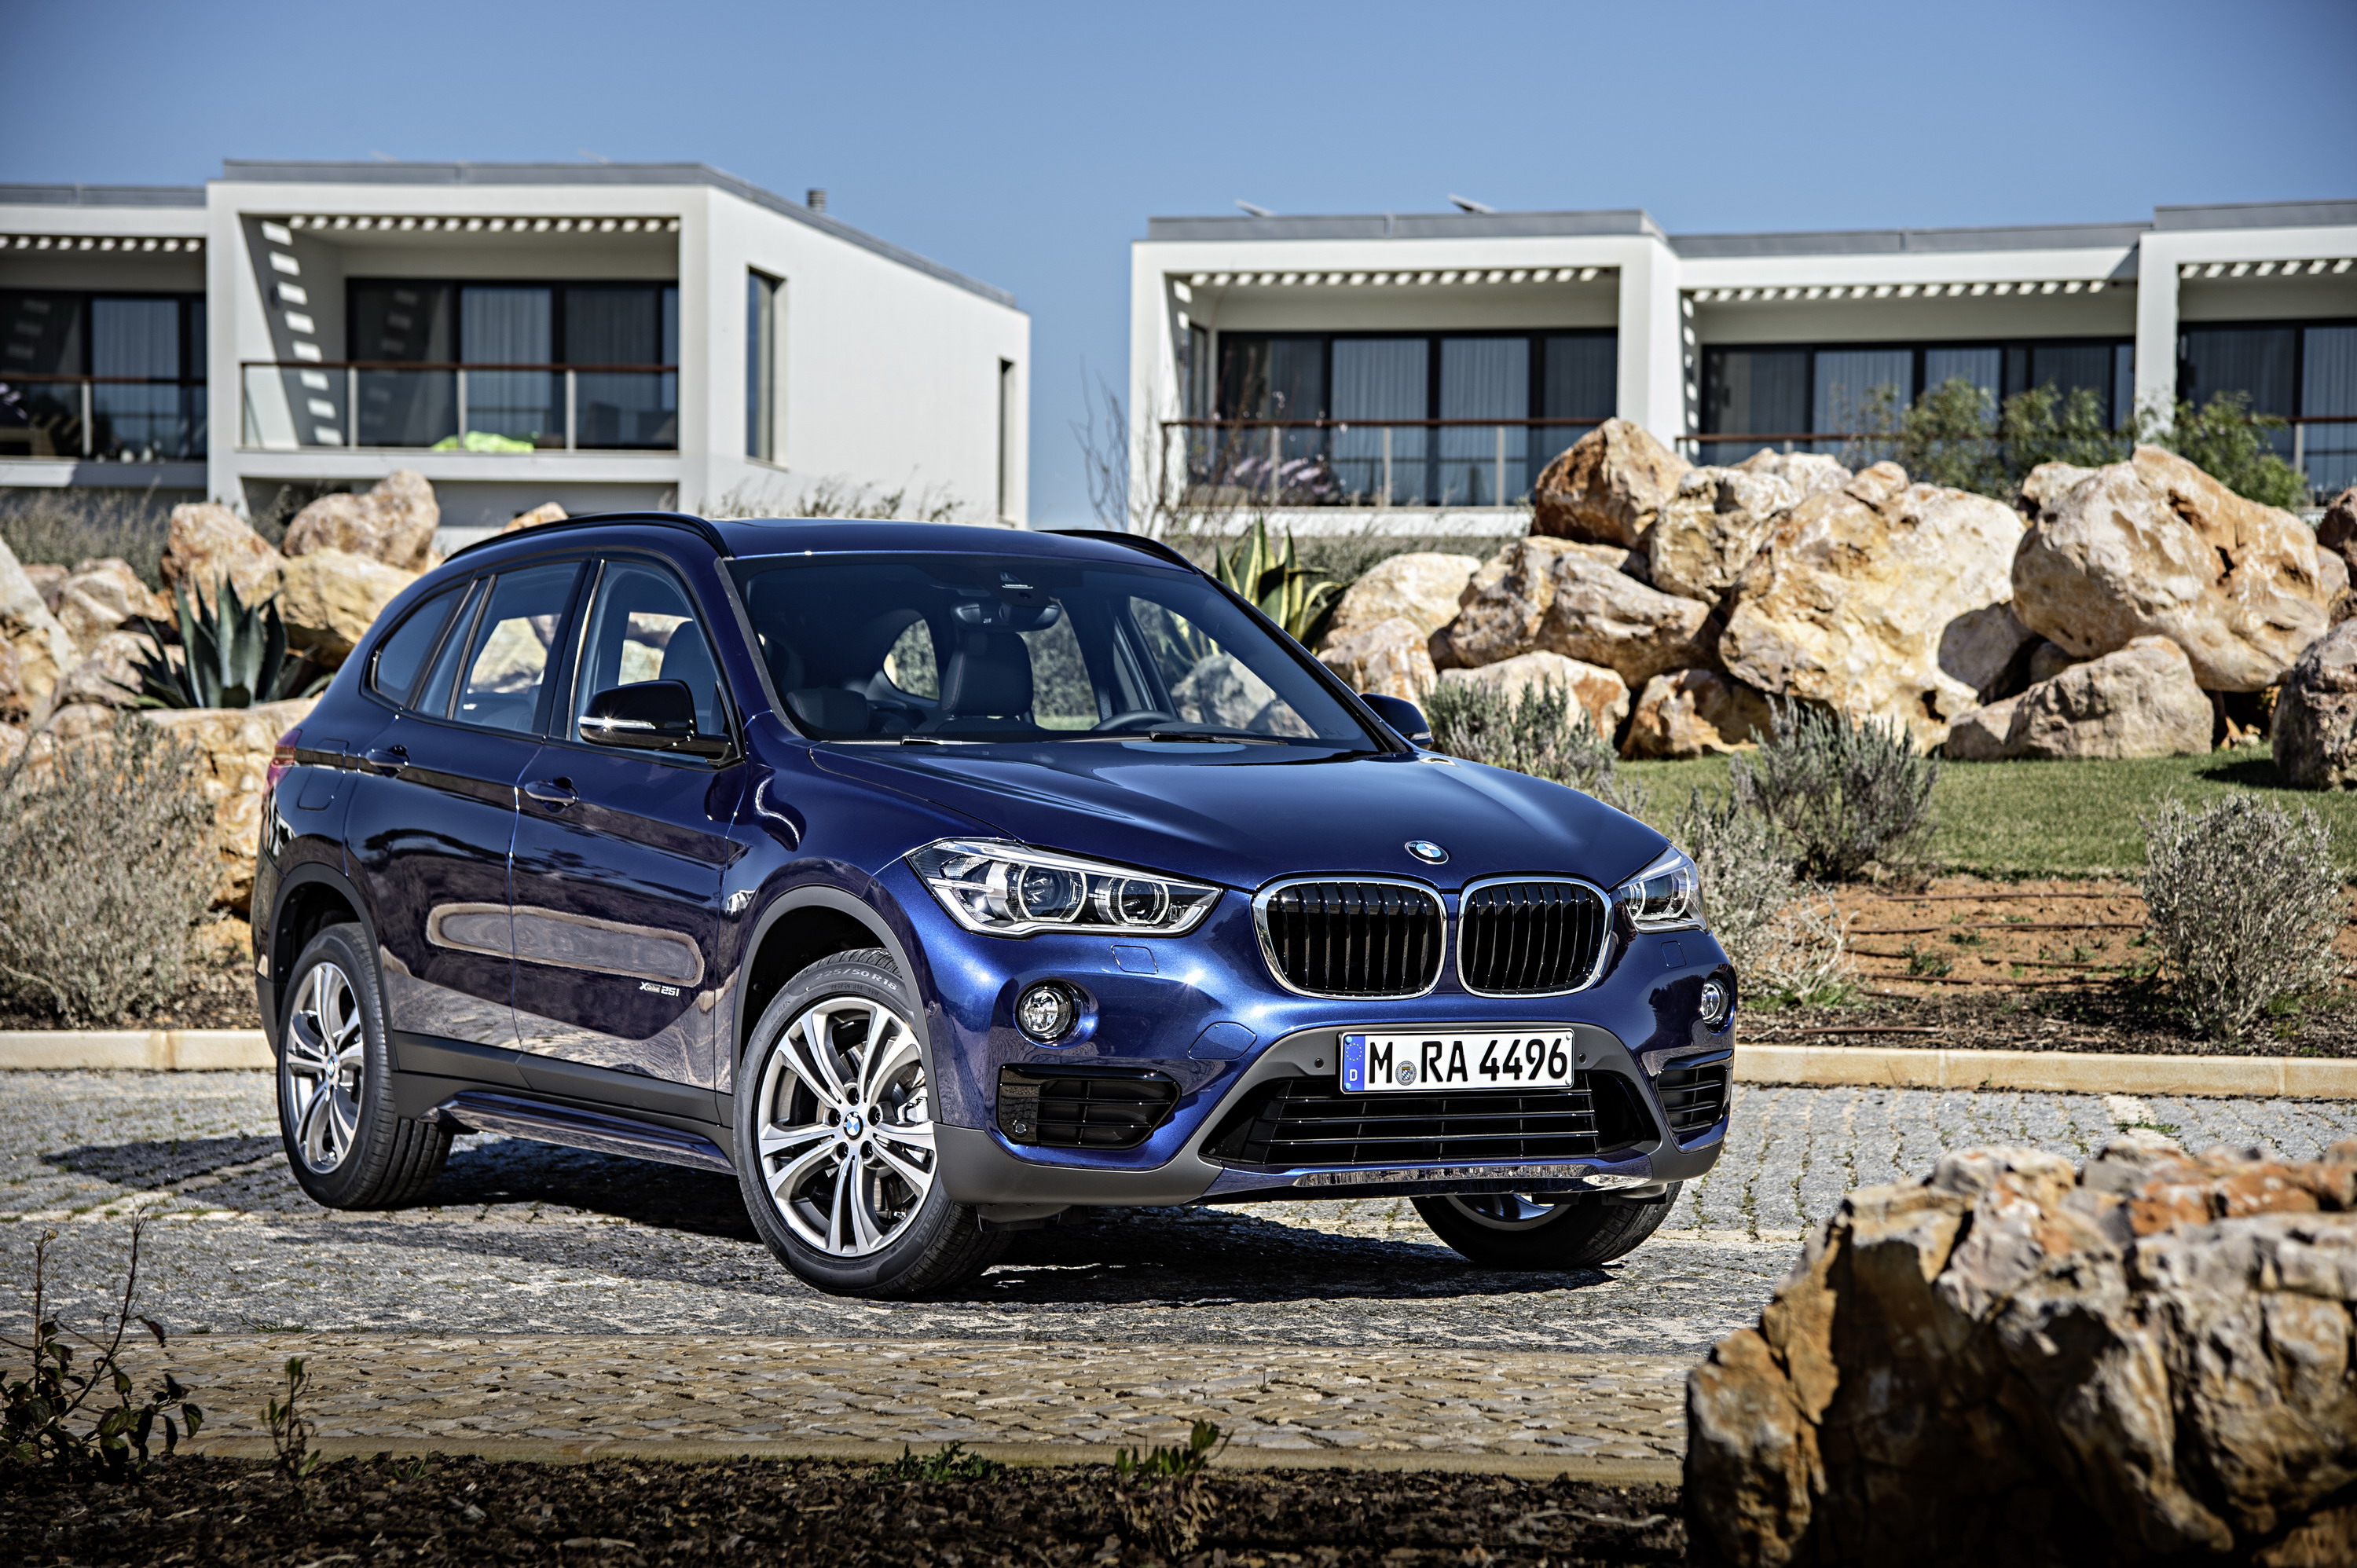 Wallpaper Of The Day: 2016 BMW X1